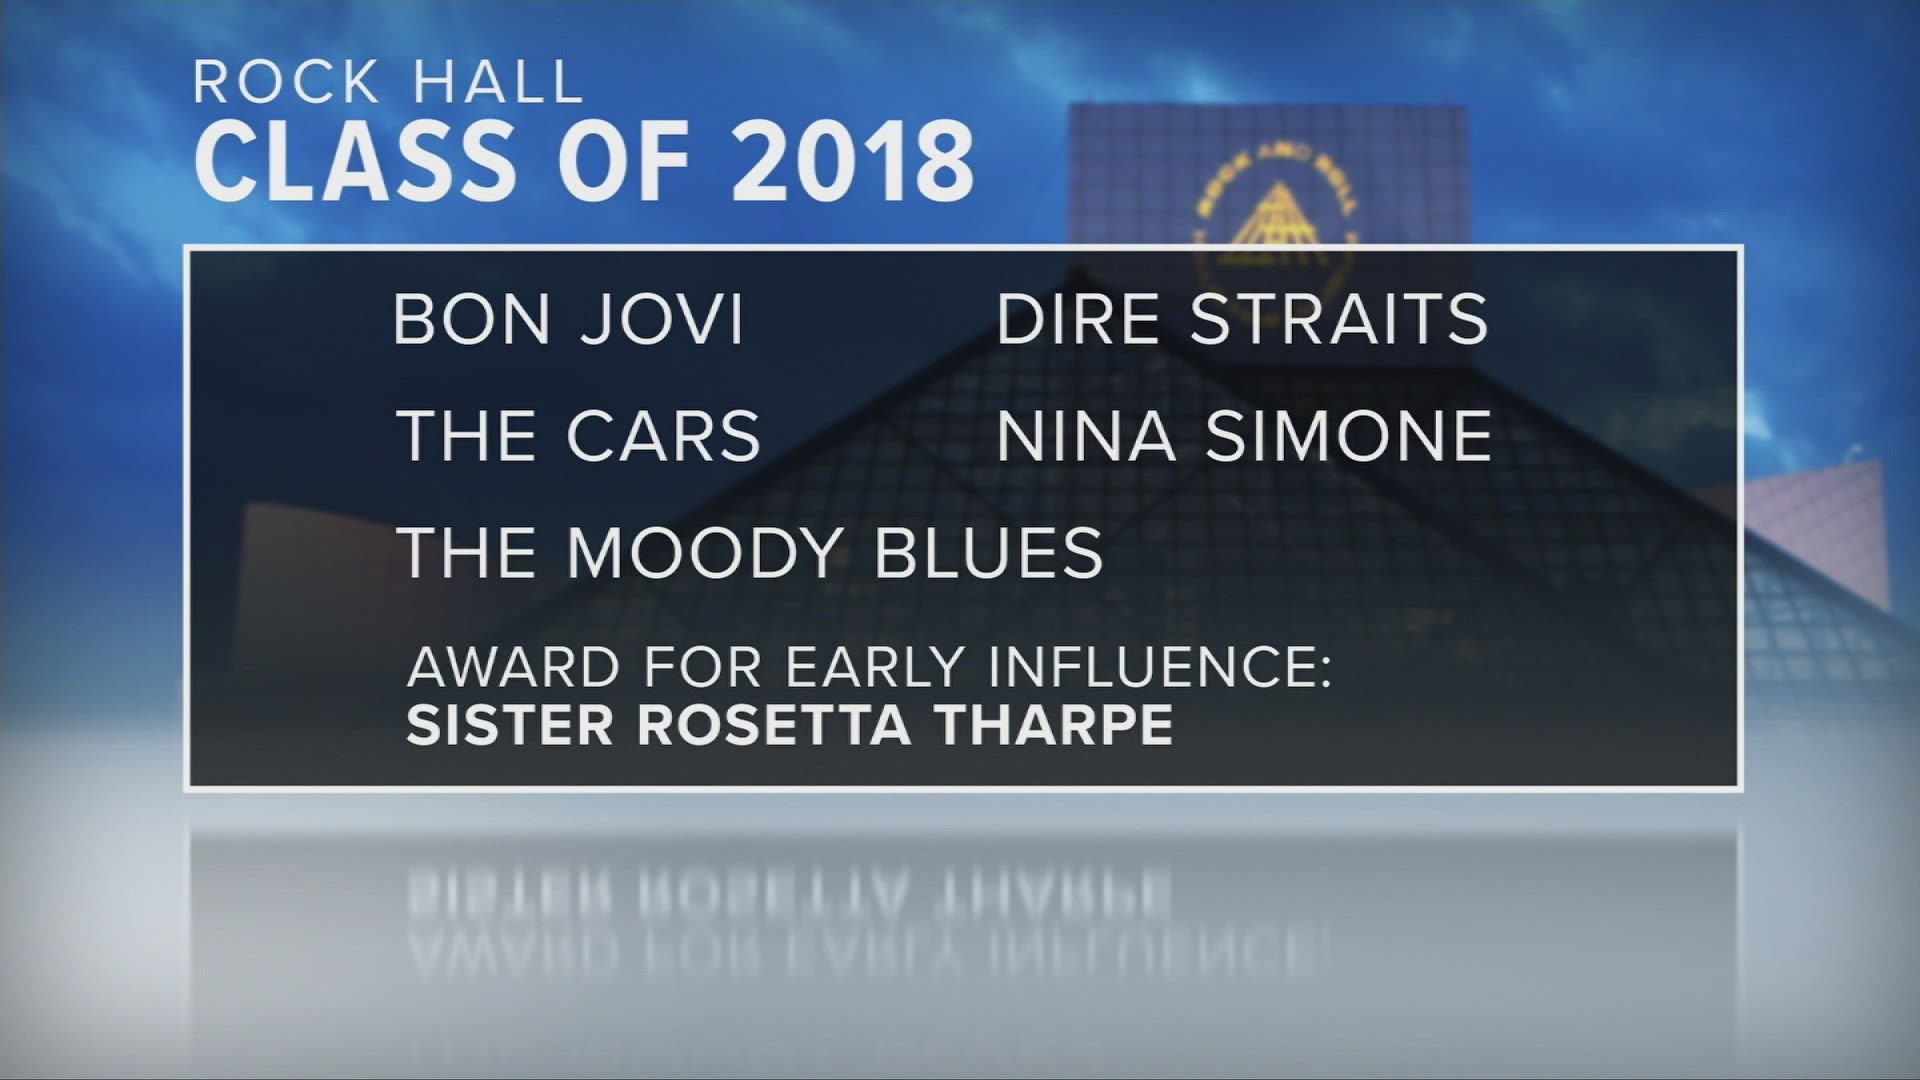 Dec. 13, 2017: Bon Jovi and the Cars are among six inductees earning to musical honor of joining the Rock and Roll Hall of Fame. Here's our extended interview about the announcement with Todd Mesek of the Rock Hall.